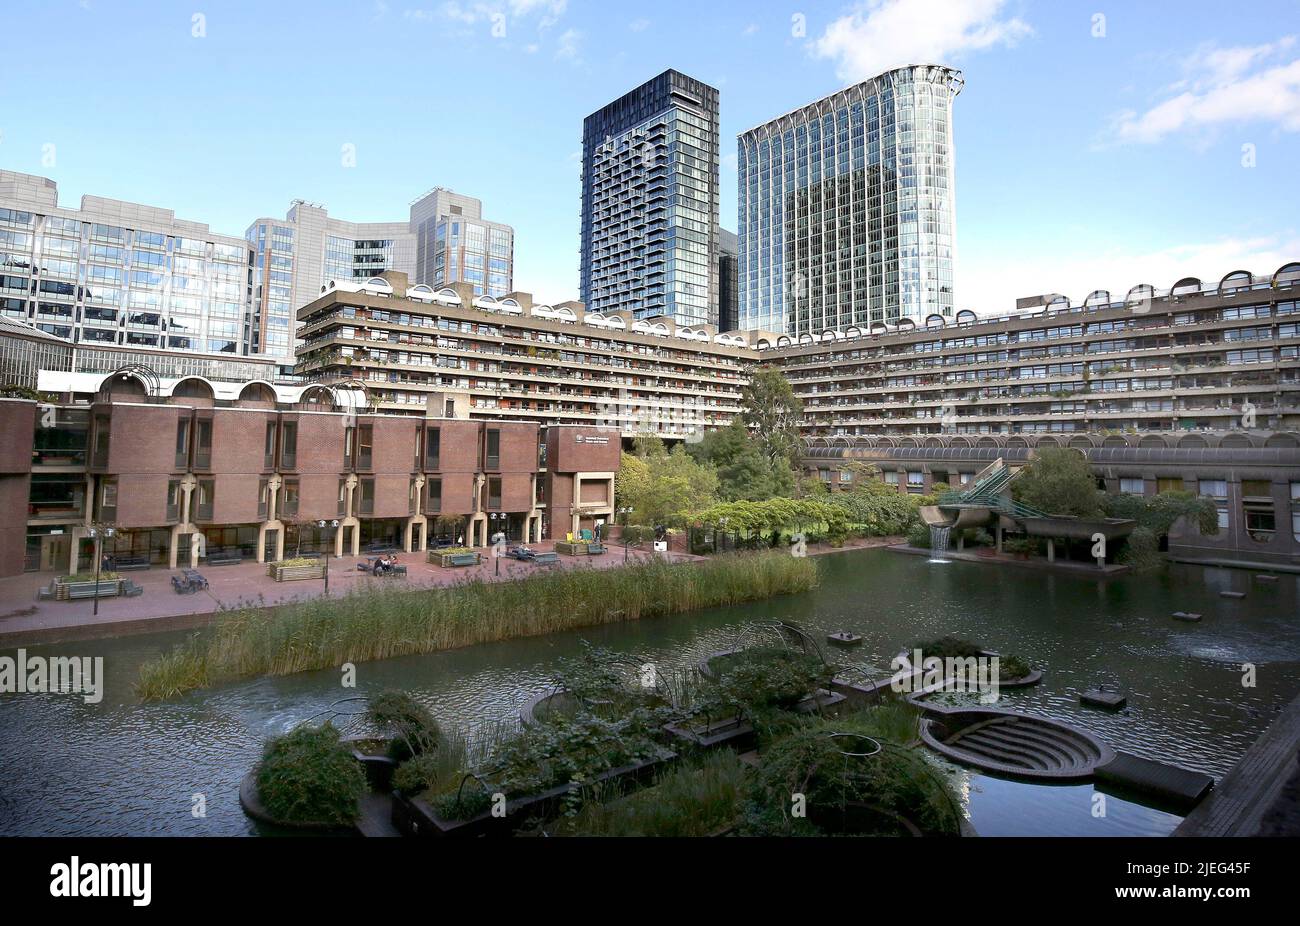 File photo dated 24/09/14 of Part of the Barbican Housing Estate and the Guildhall School of Music and Drama in the City of London, as a campaign has been launched urging the City of London Corporation to reconsider its decision to demolish historic buildings, including the Museum of London, in the capital's Barbican. Stock Photo